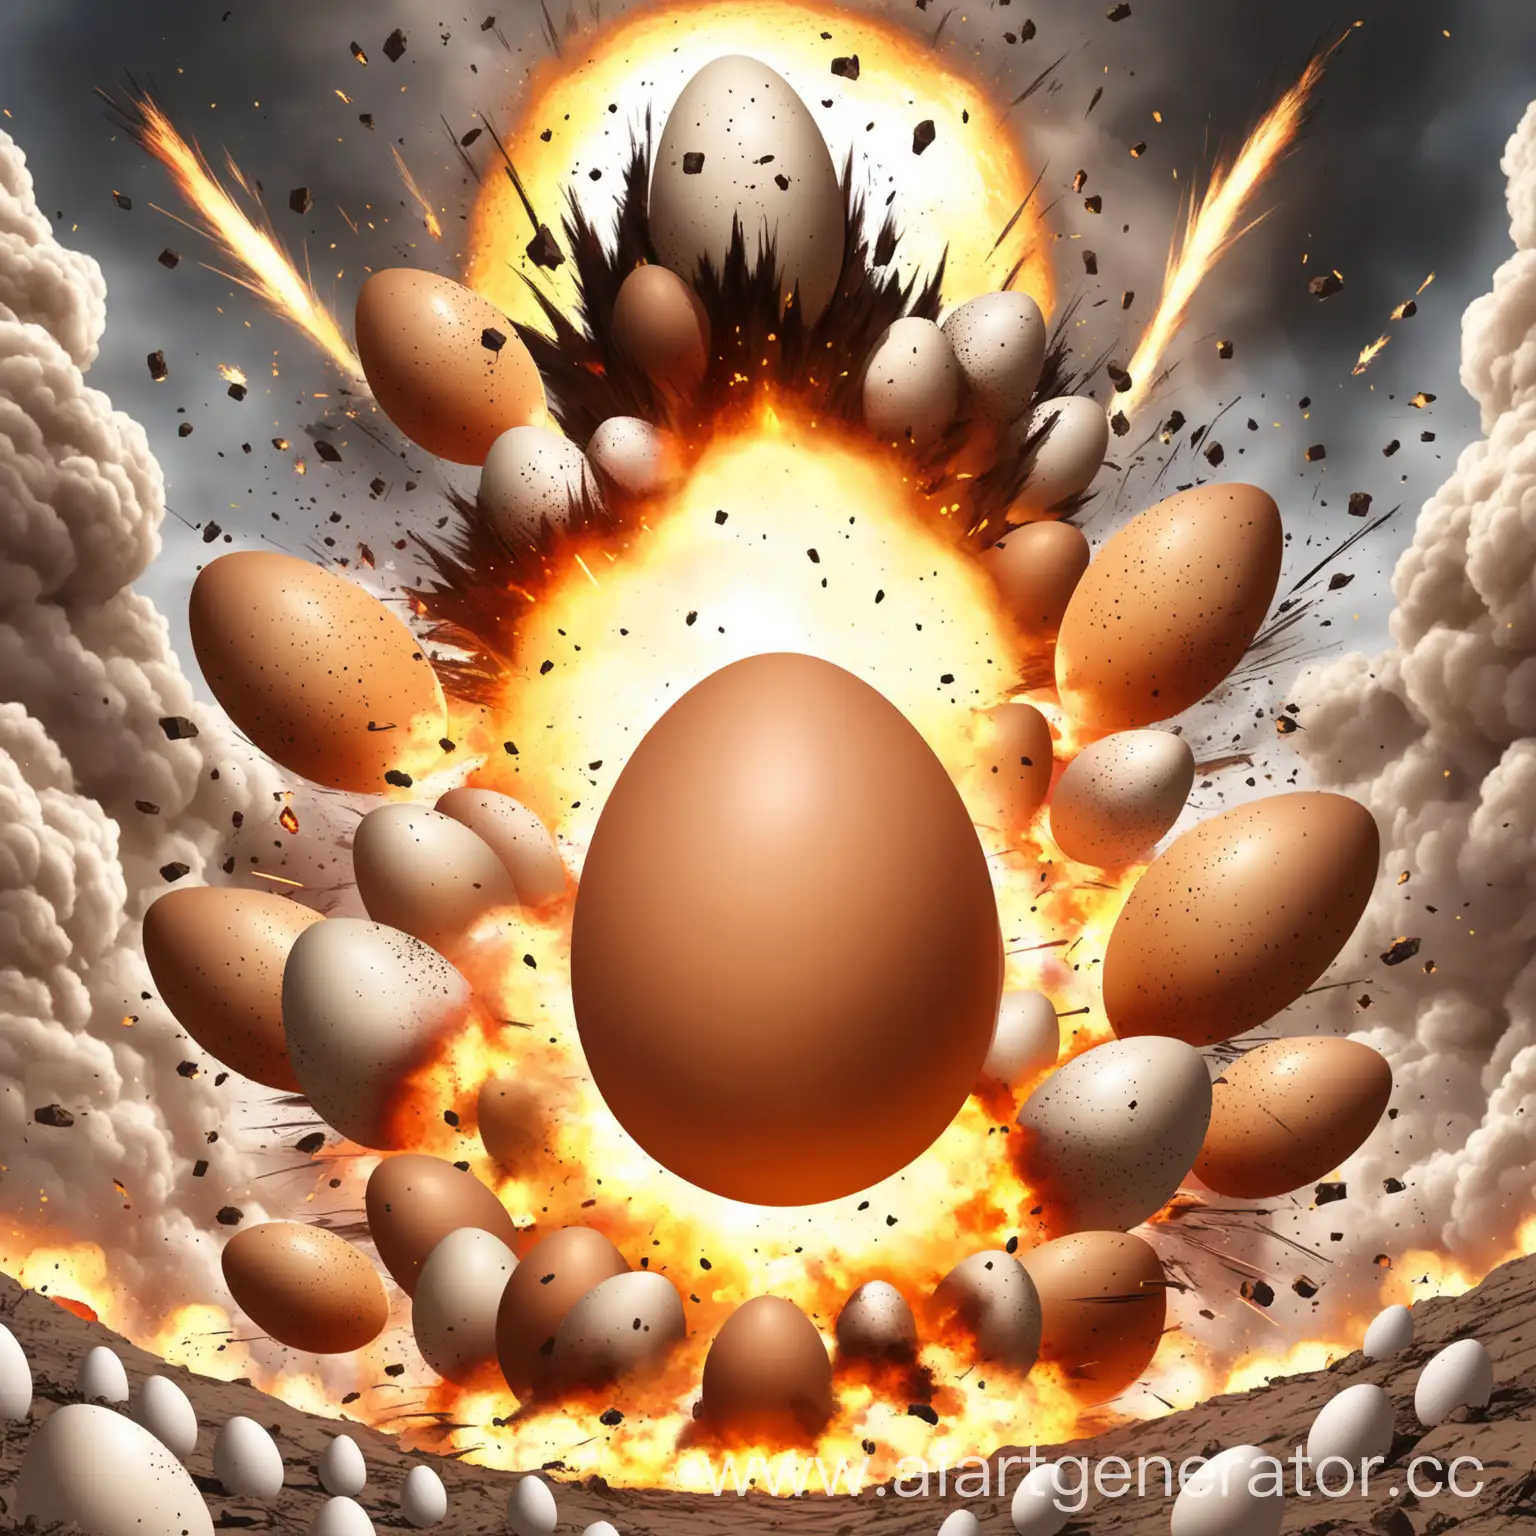 Epic-Explosions-Behind-a-Giant-Egg